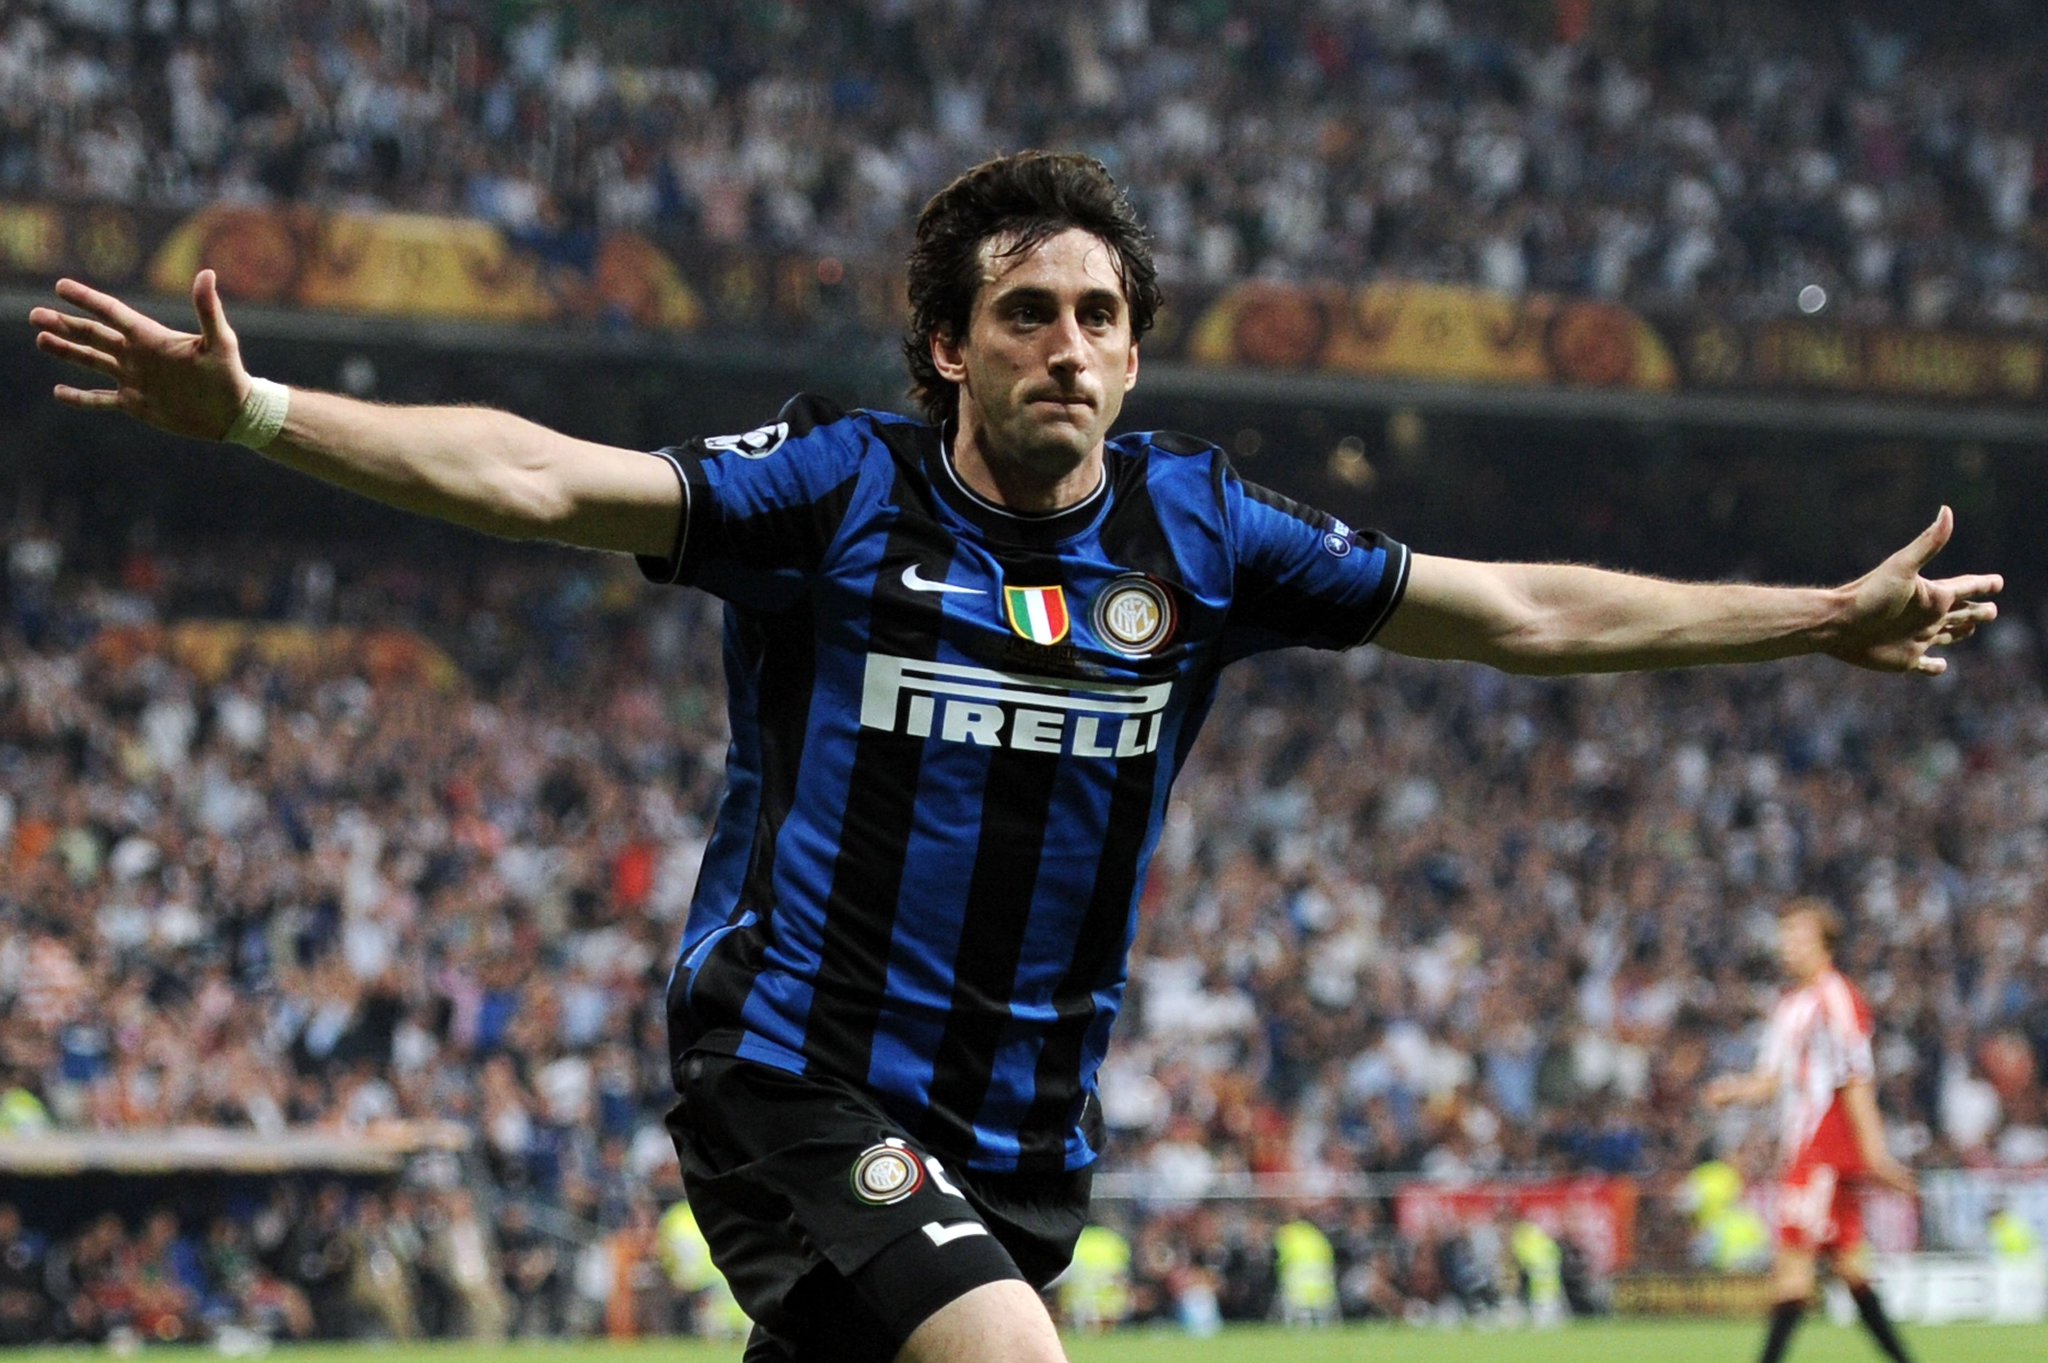 A happy birthday to 2010  winner Diego Milito who turns 3  8  today! 